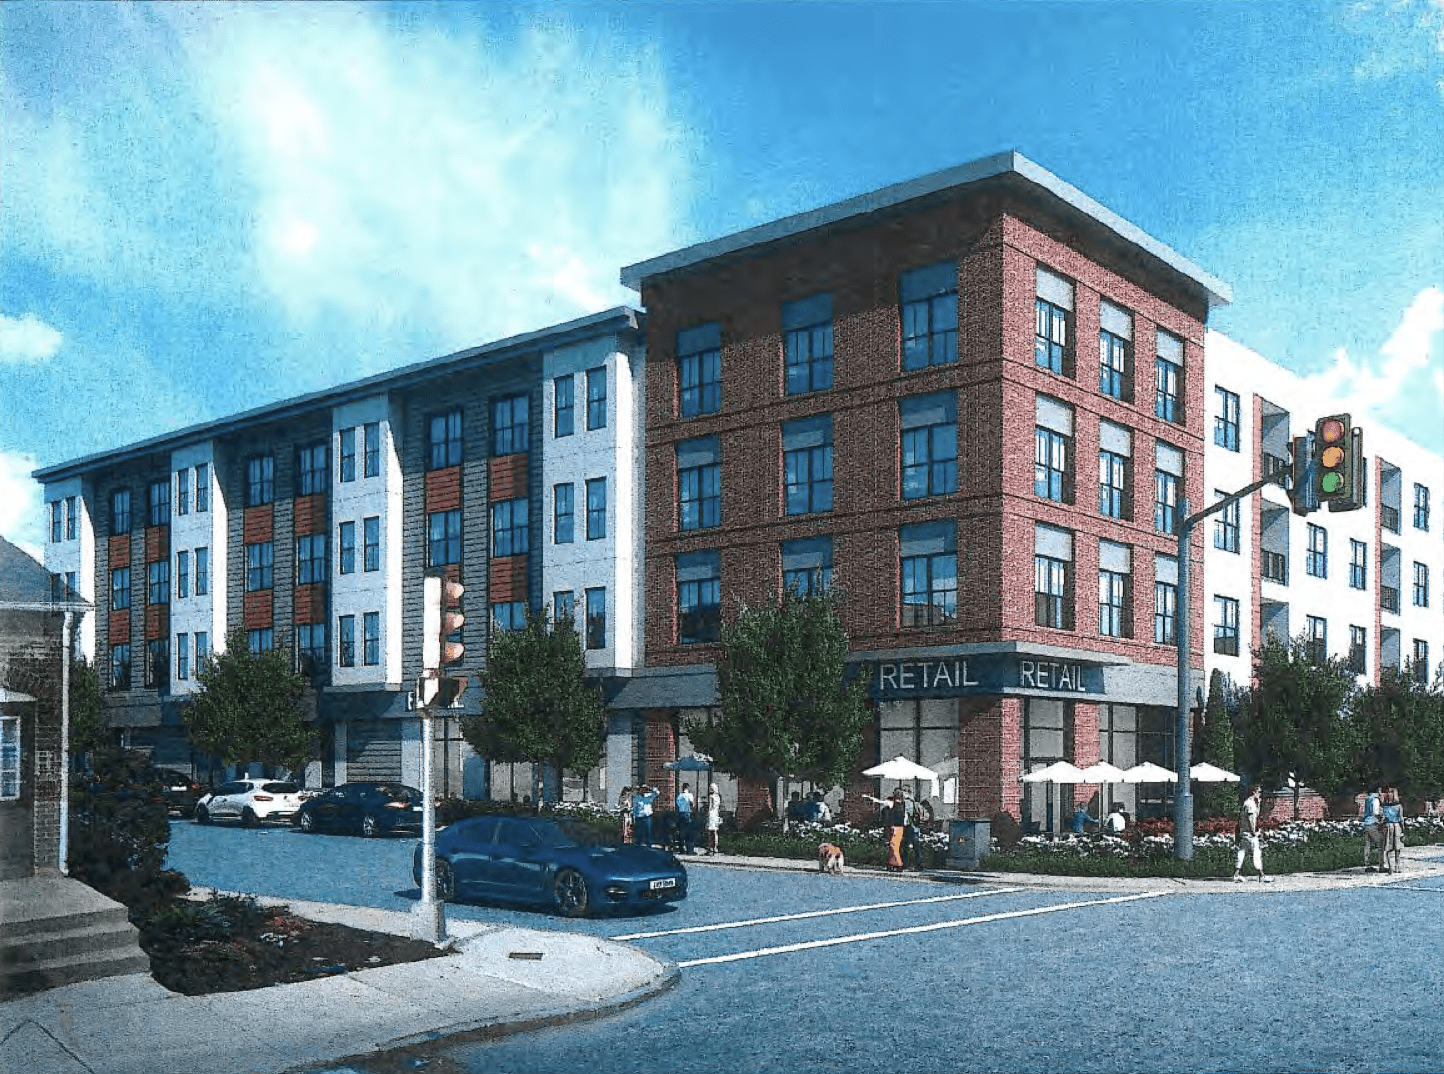 Developer pitches mixed-use project in Marlborough’s French Hill neighborhood